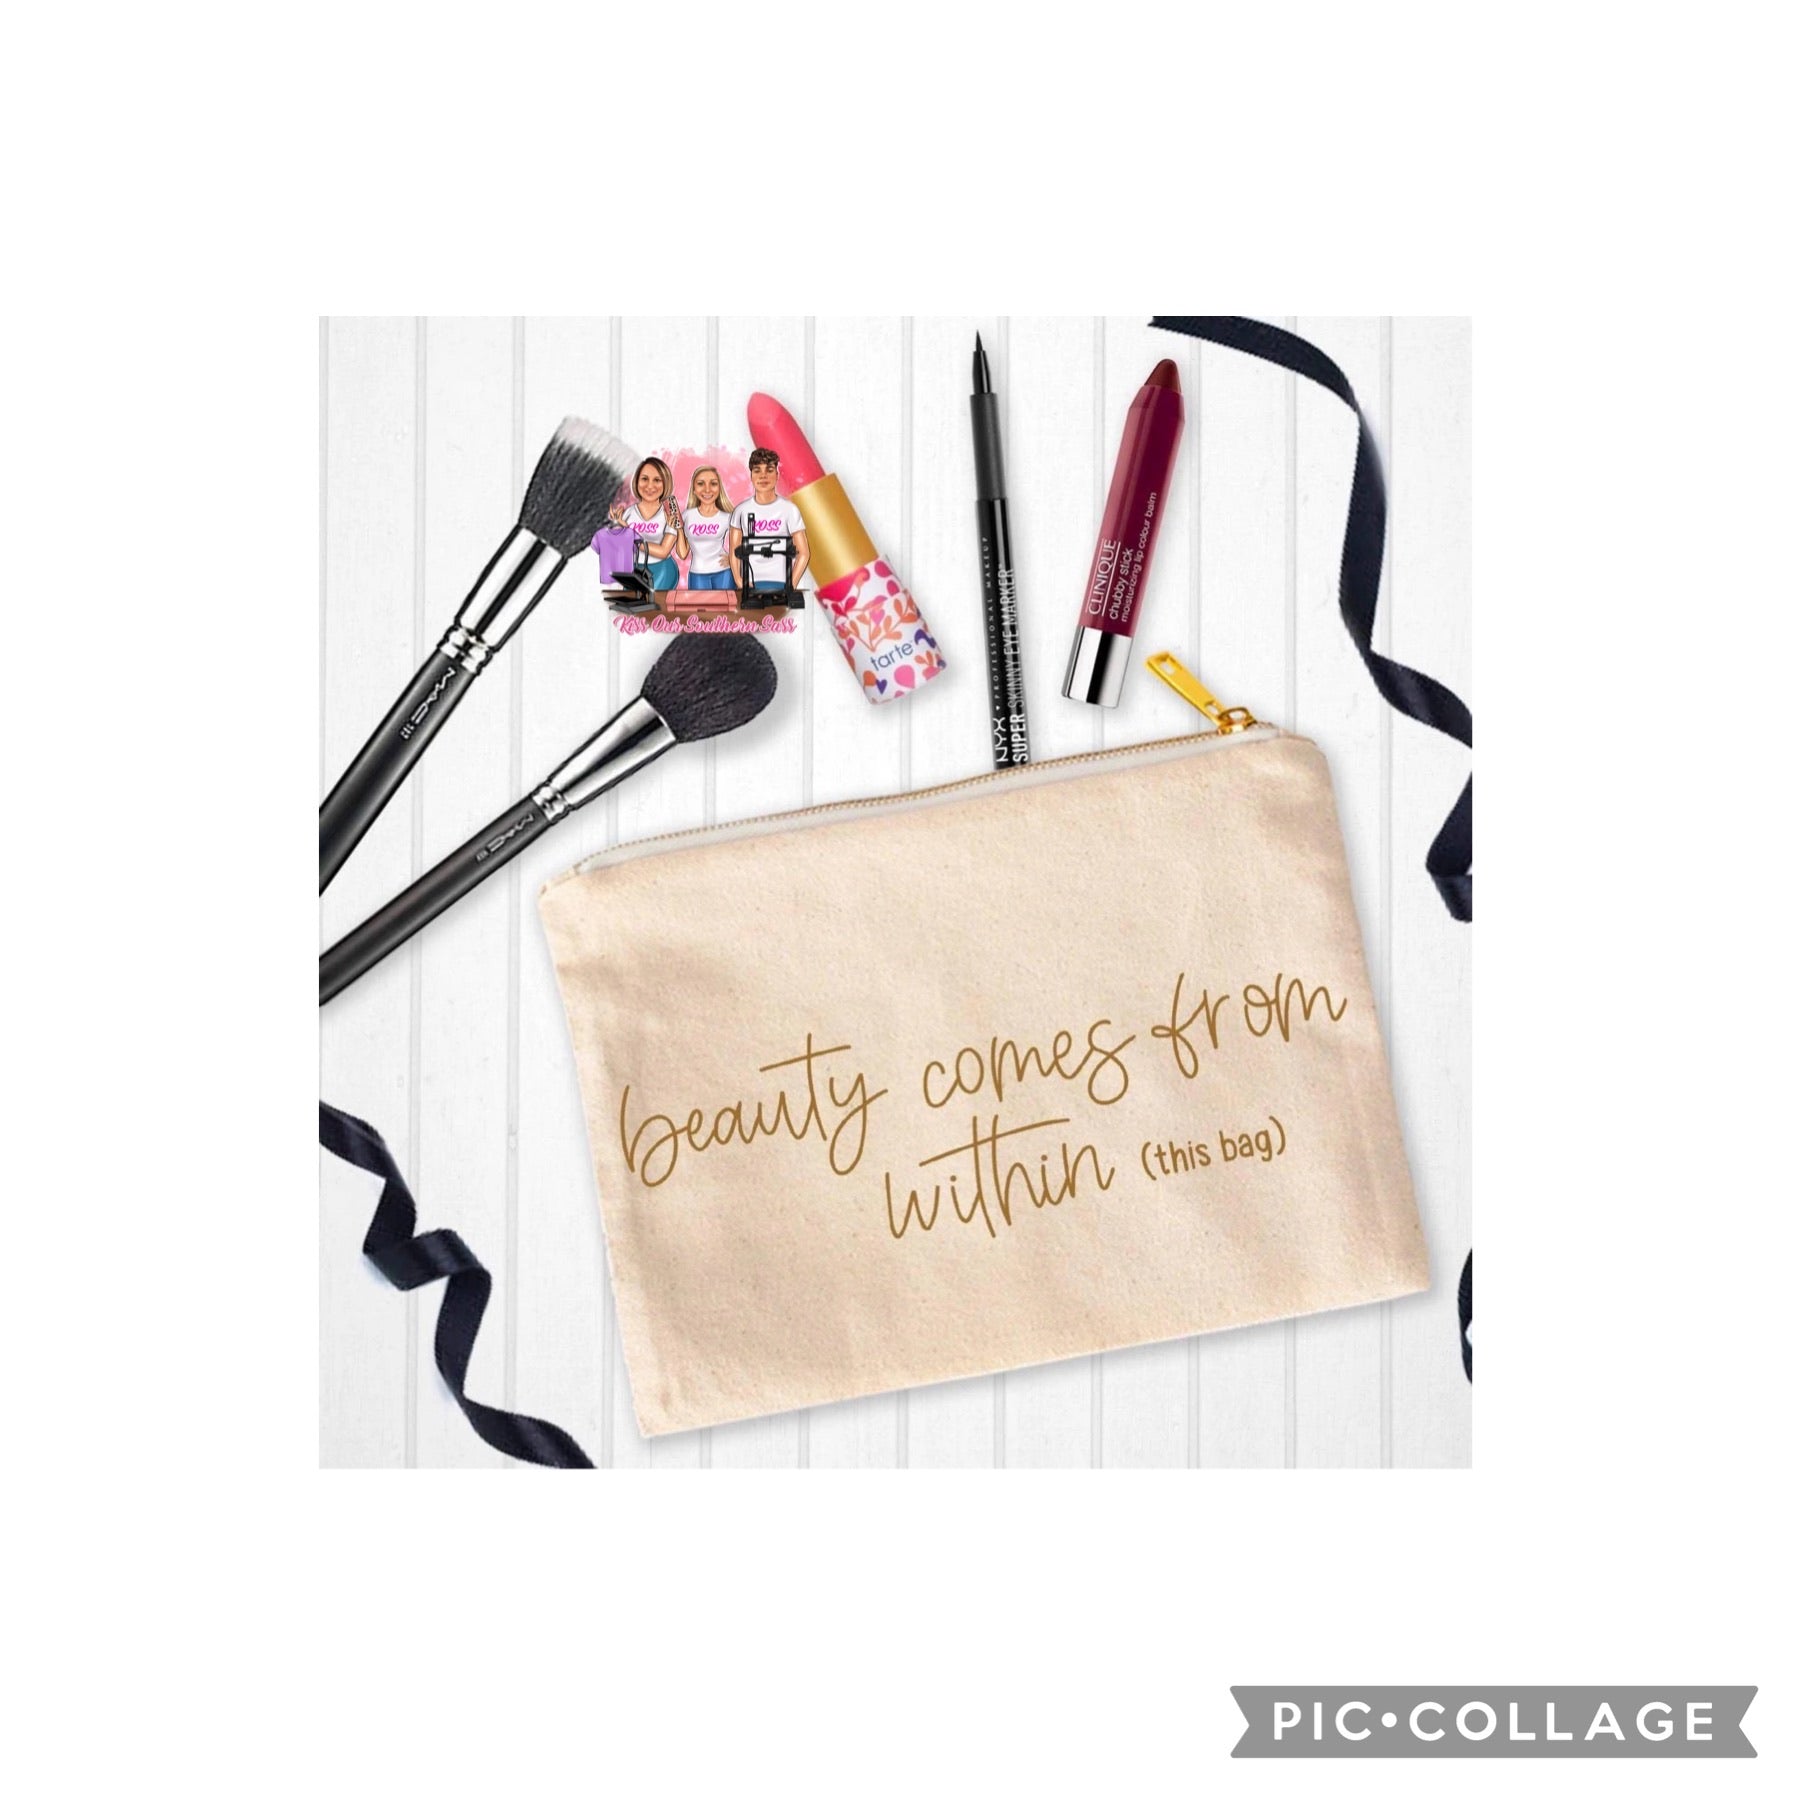 Beauty comes from within (this bag) Tan Bag